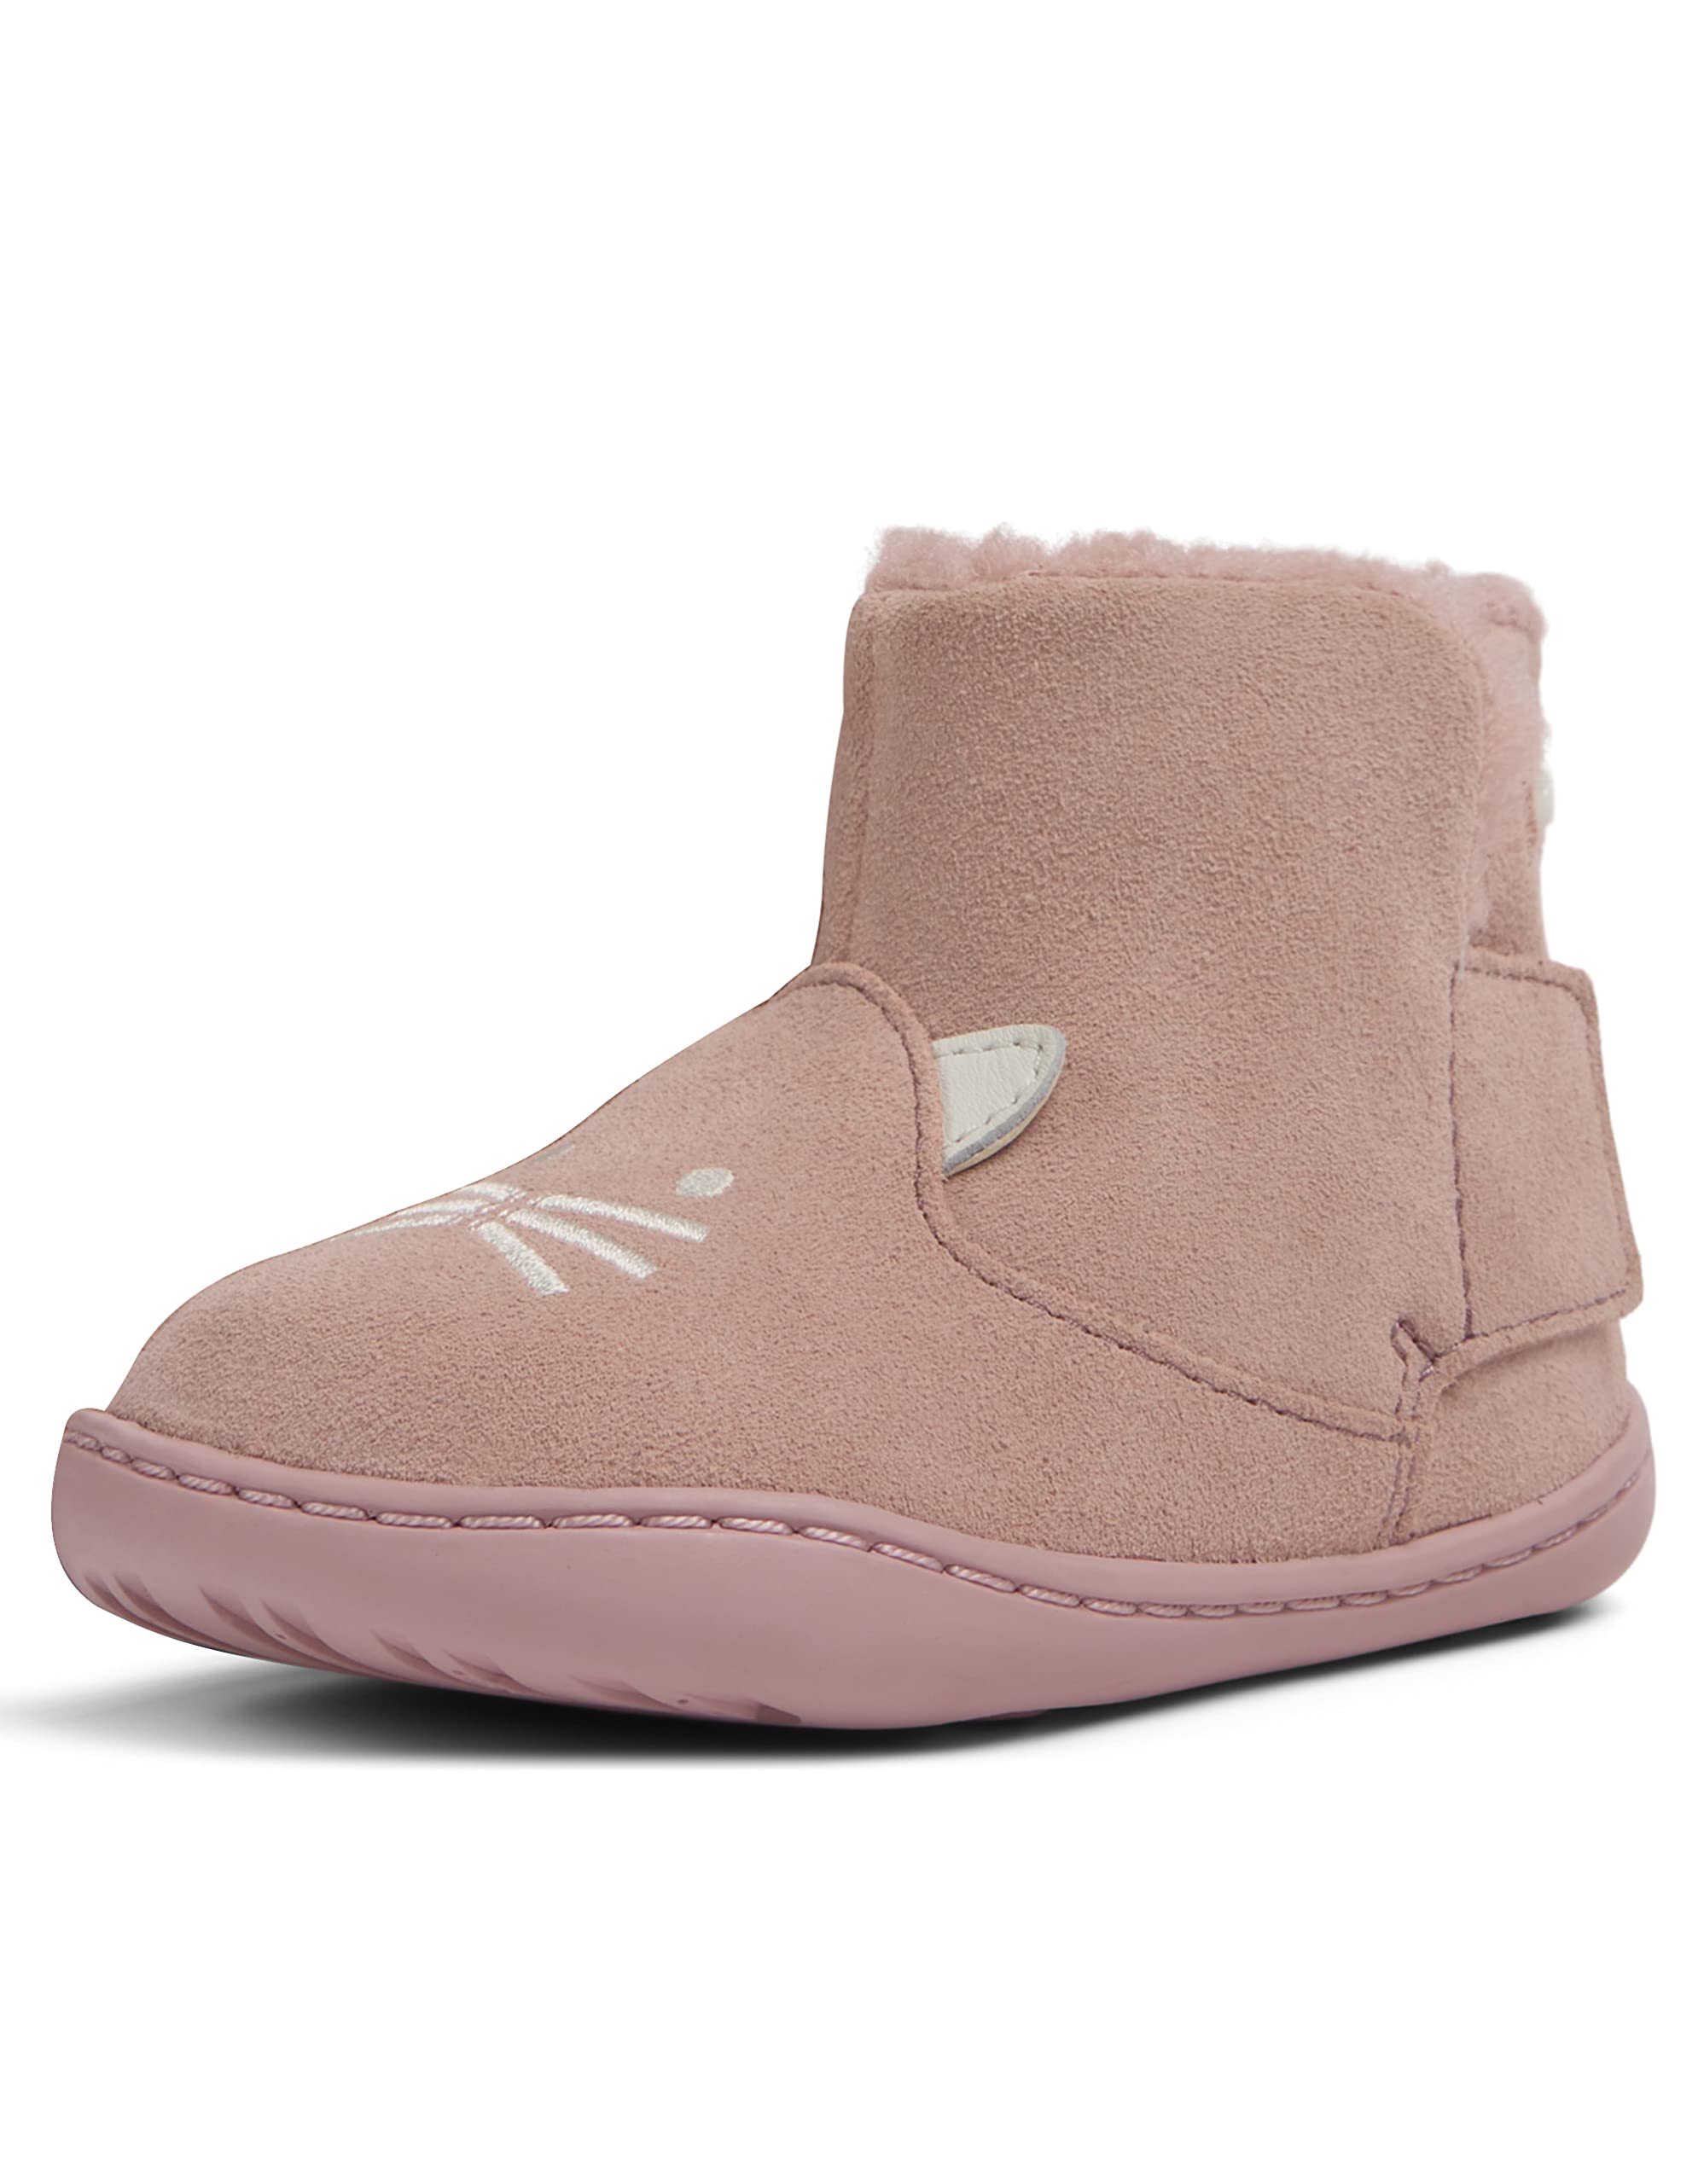 Camper Unisex-Child Peu Cami Fw Ankle Boot